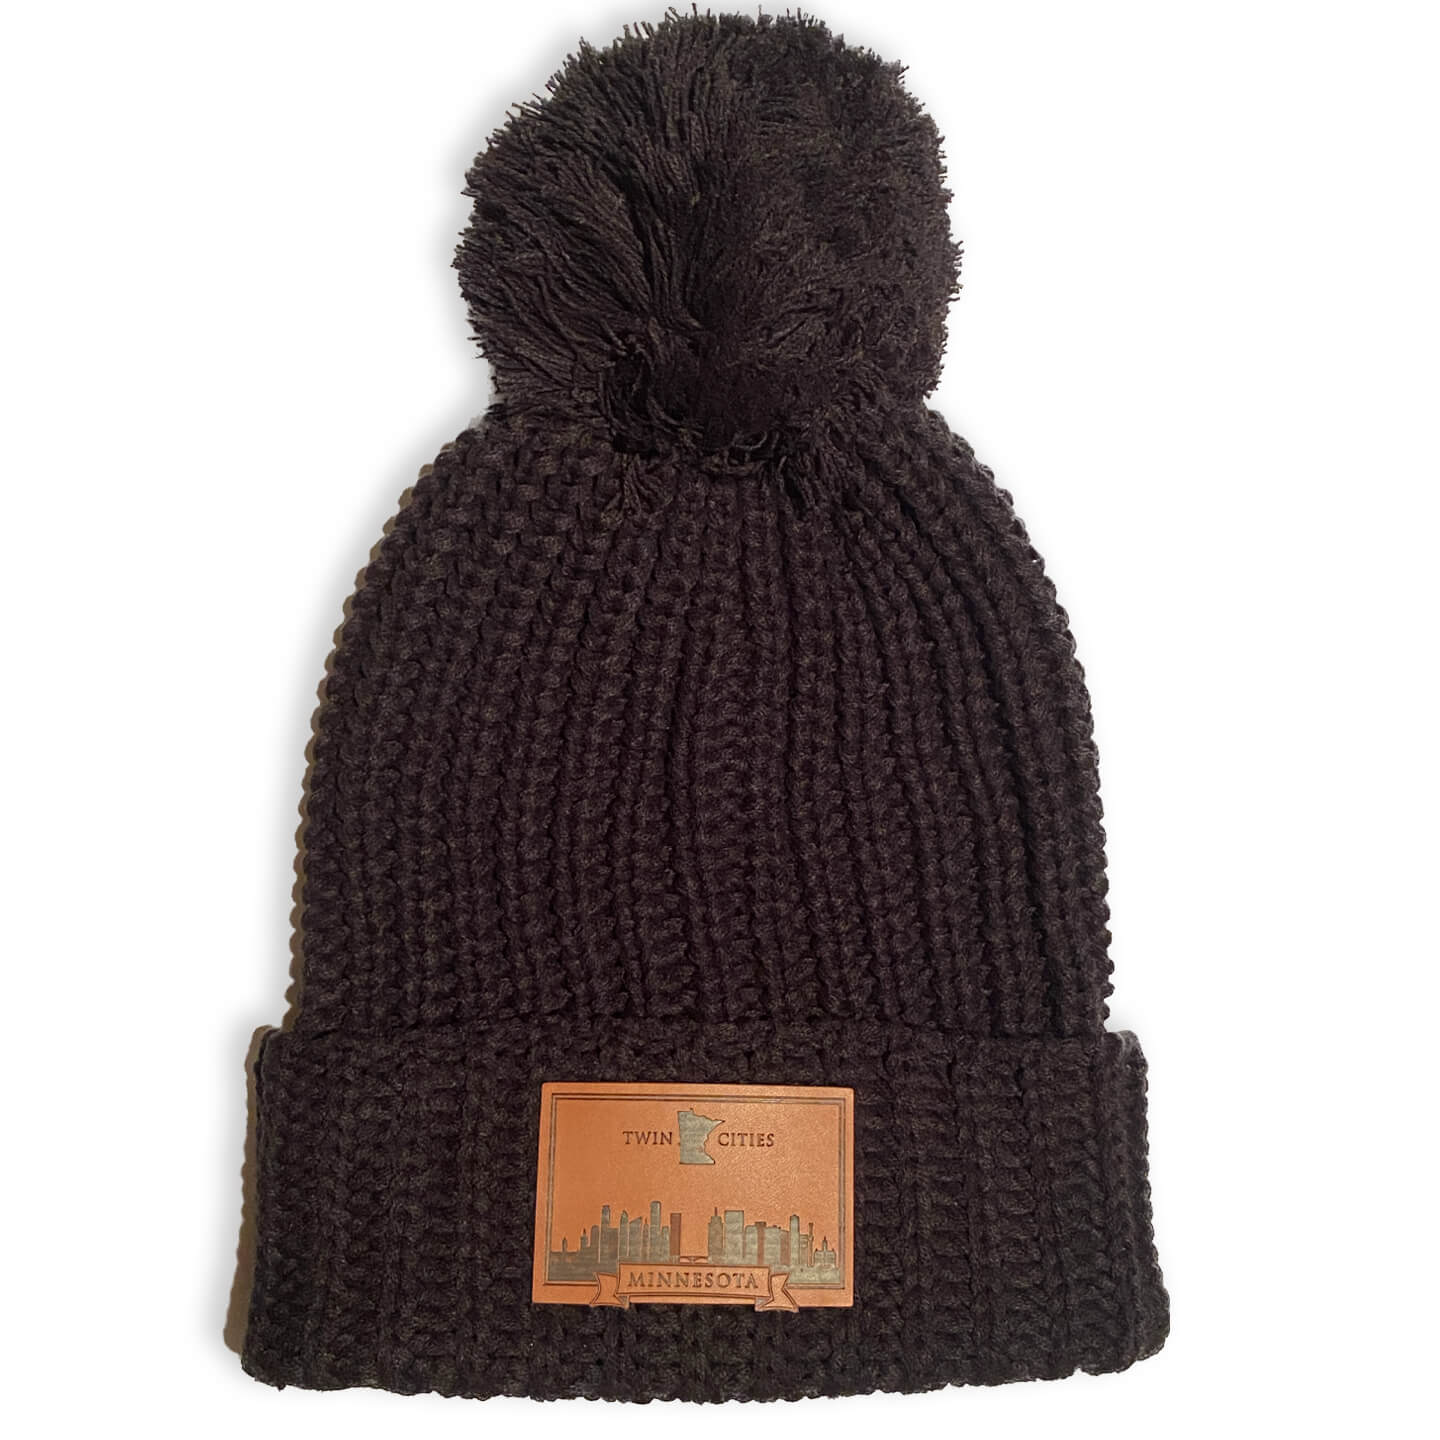 Black Chunky Cable with Cuff & Pom Beanie with Leather Twin Cities Patch